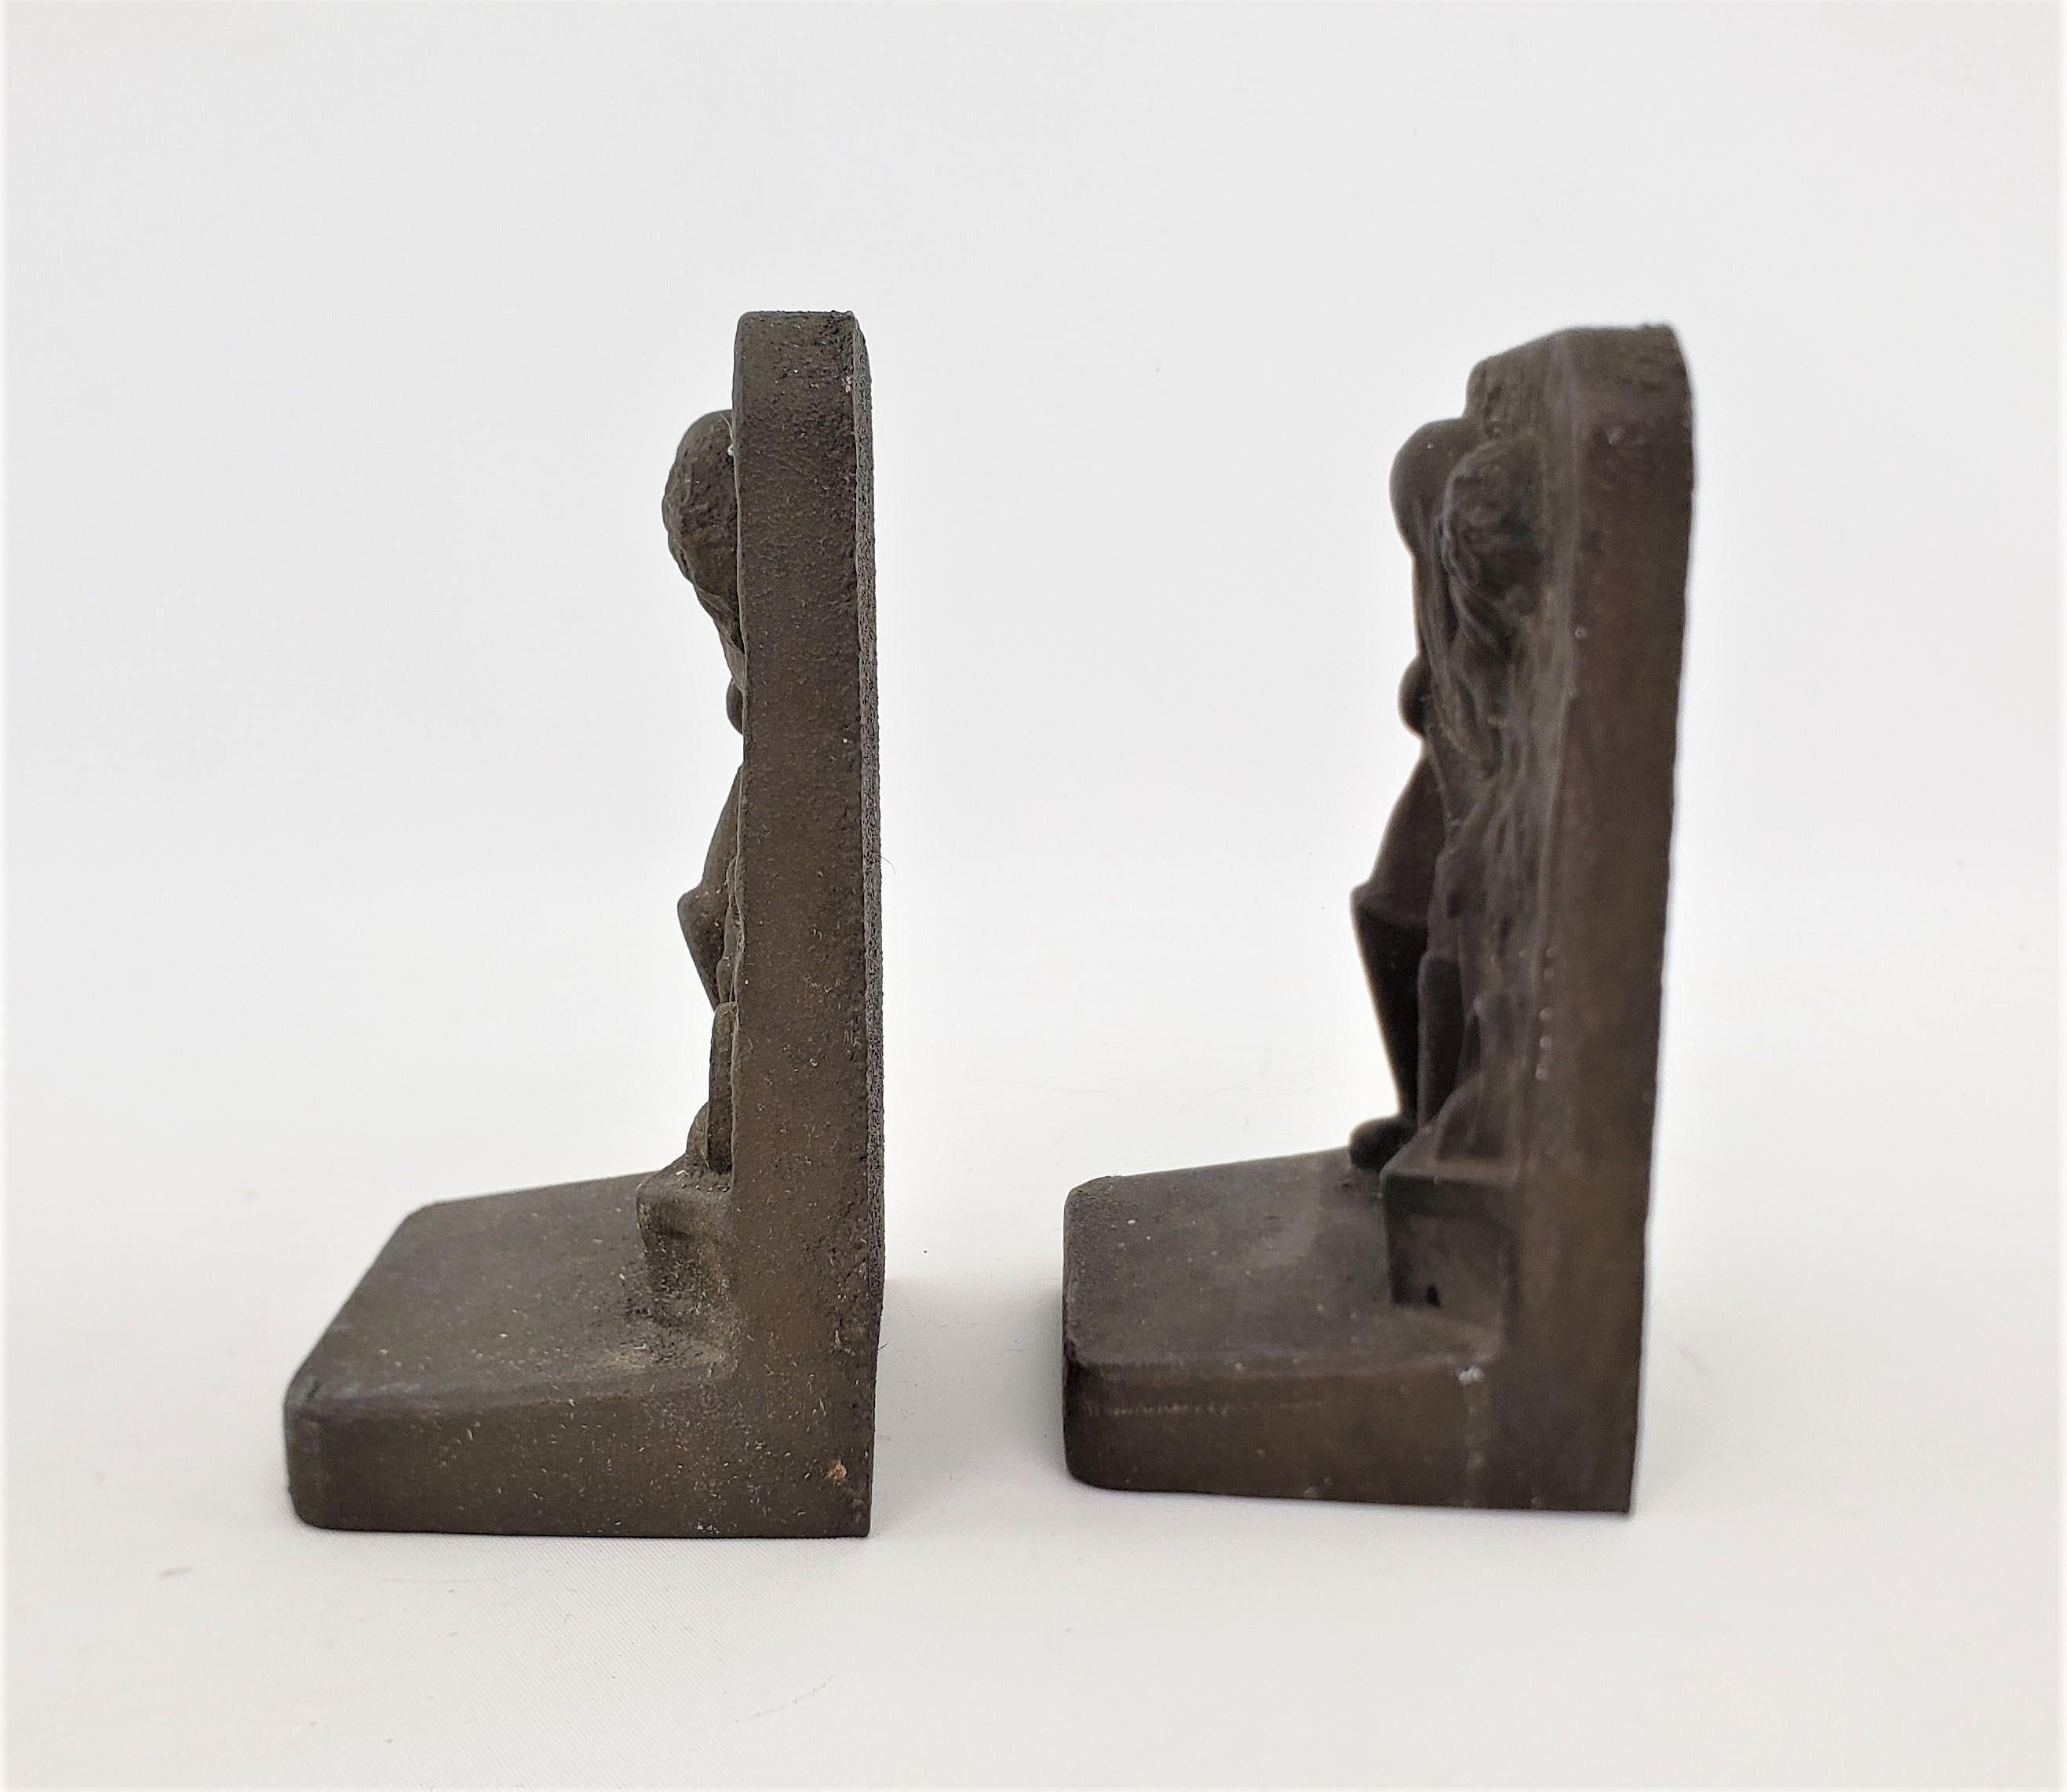 20th Century Pair of Mid-Century Modern Brutalist Cast Brass Bookends of Male Foundry Worker For Sale